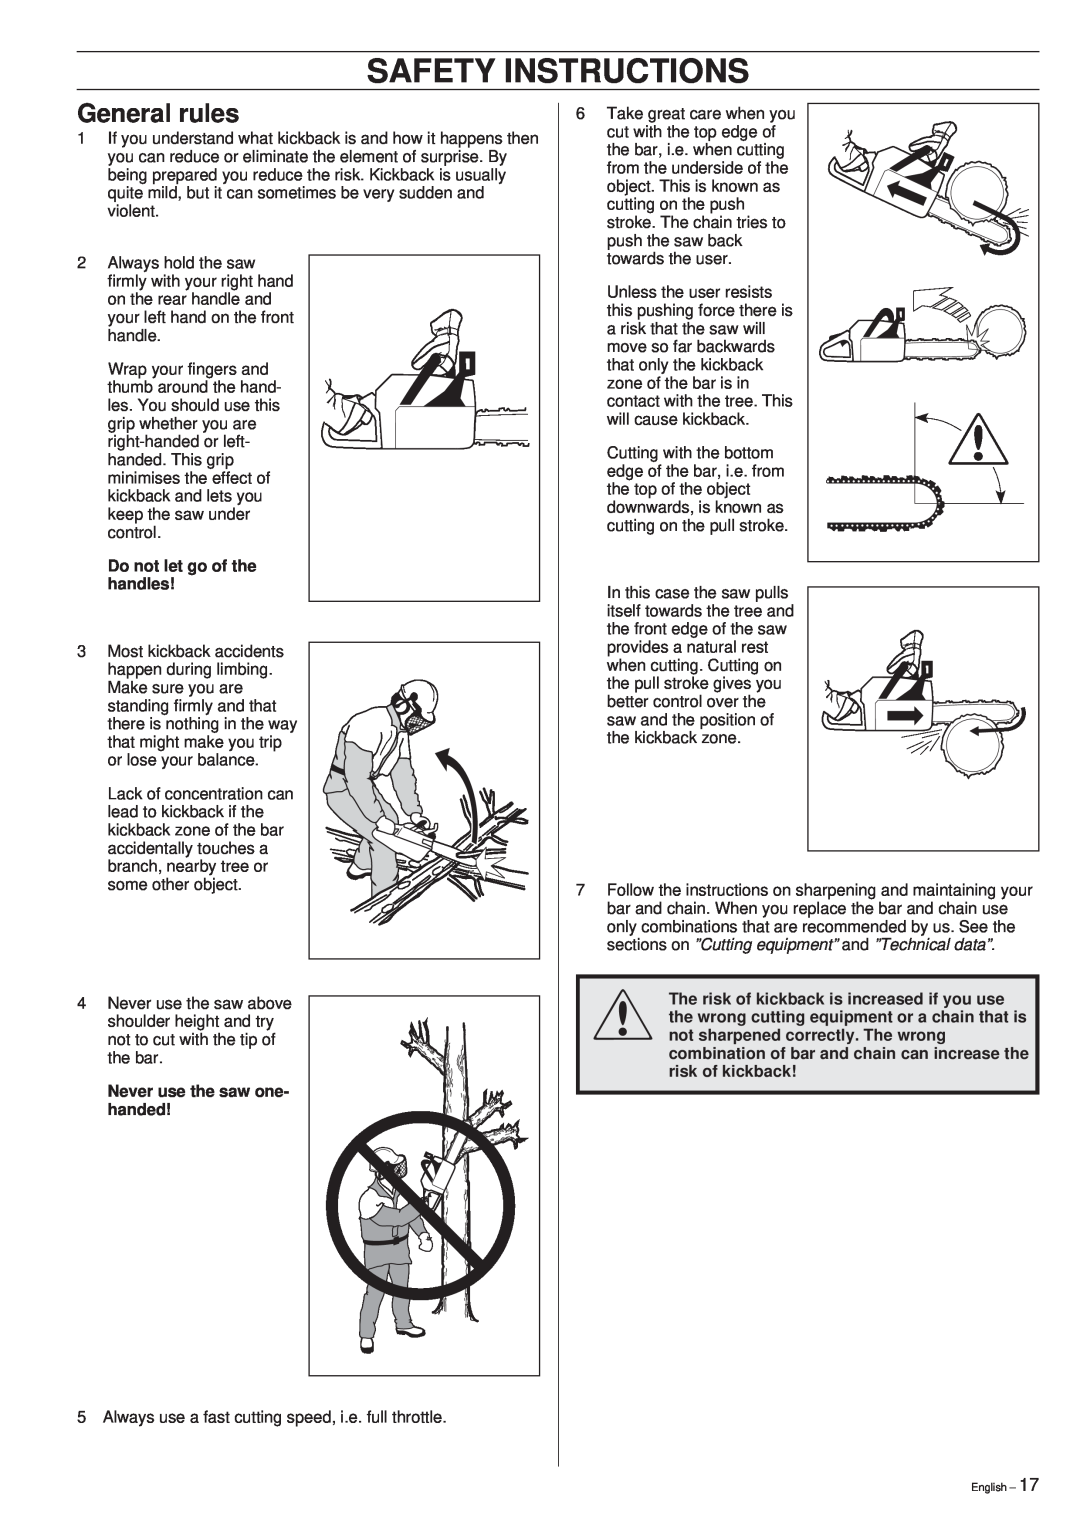 Husqvarna 45 manual Safety Instructions, General rules, Do not let go of the handles, Never use the saw one- handed 